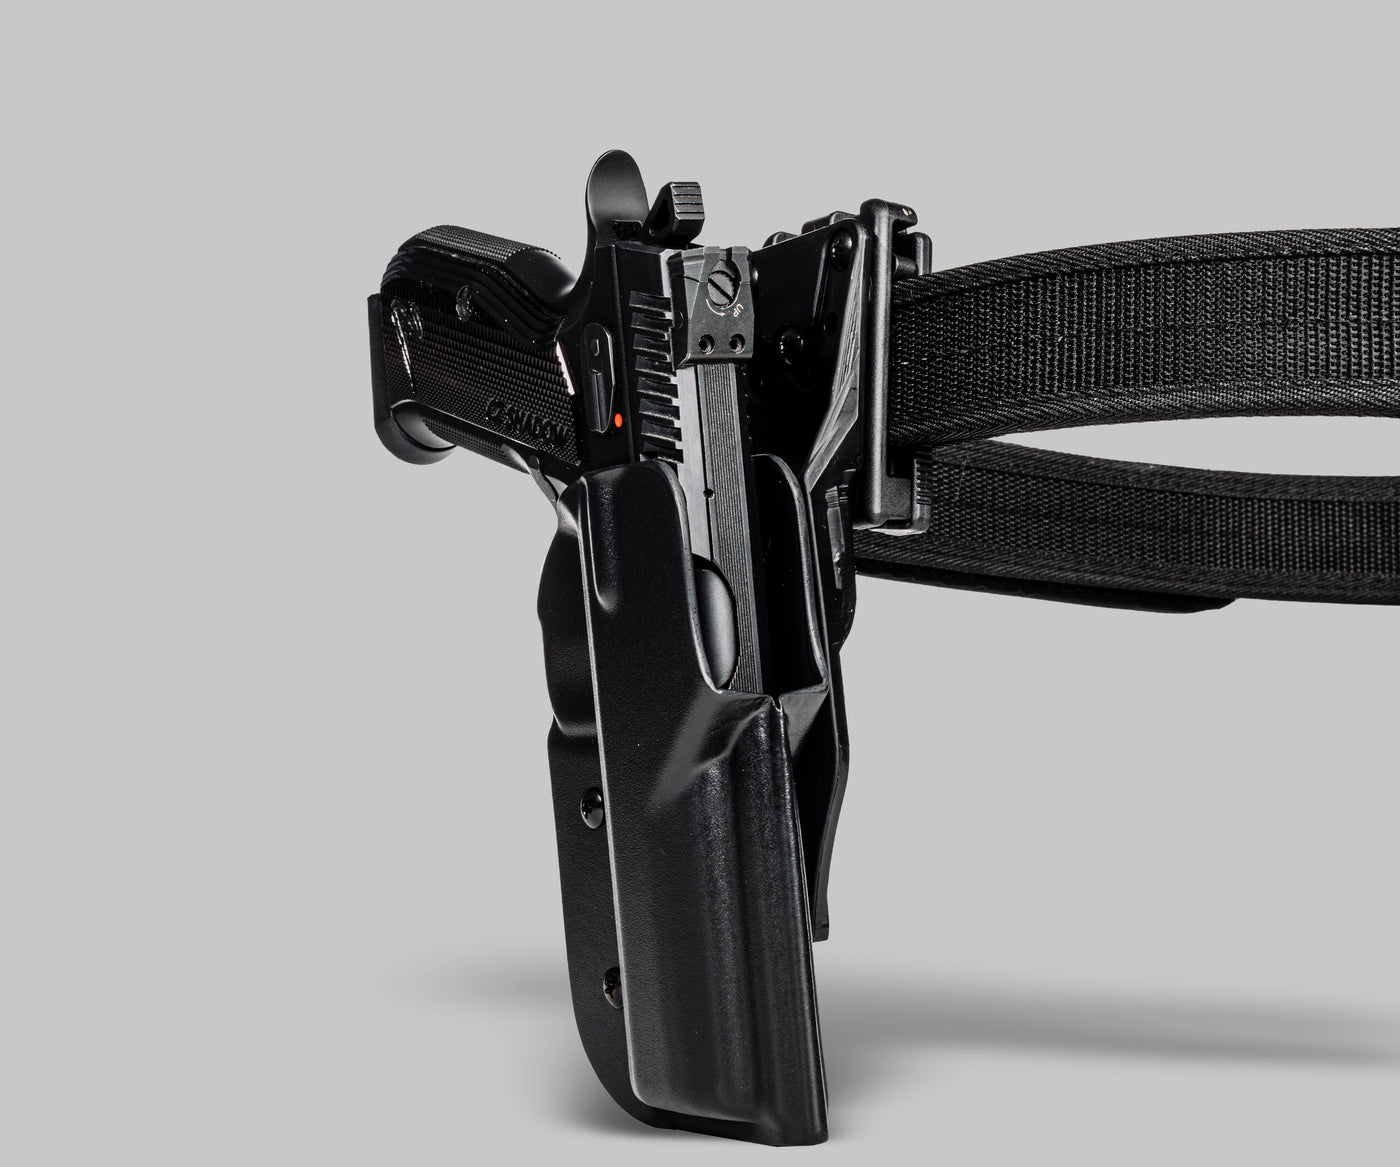 Drop and Offset - Long Drop Holster Attachment